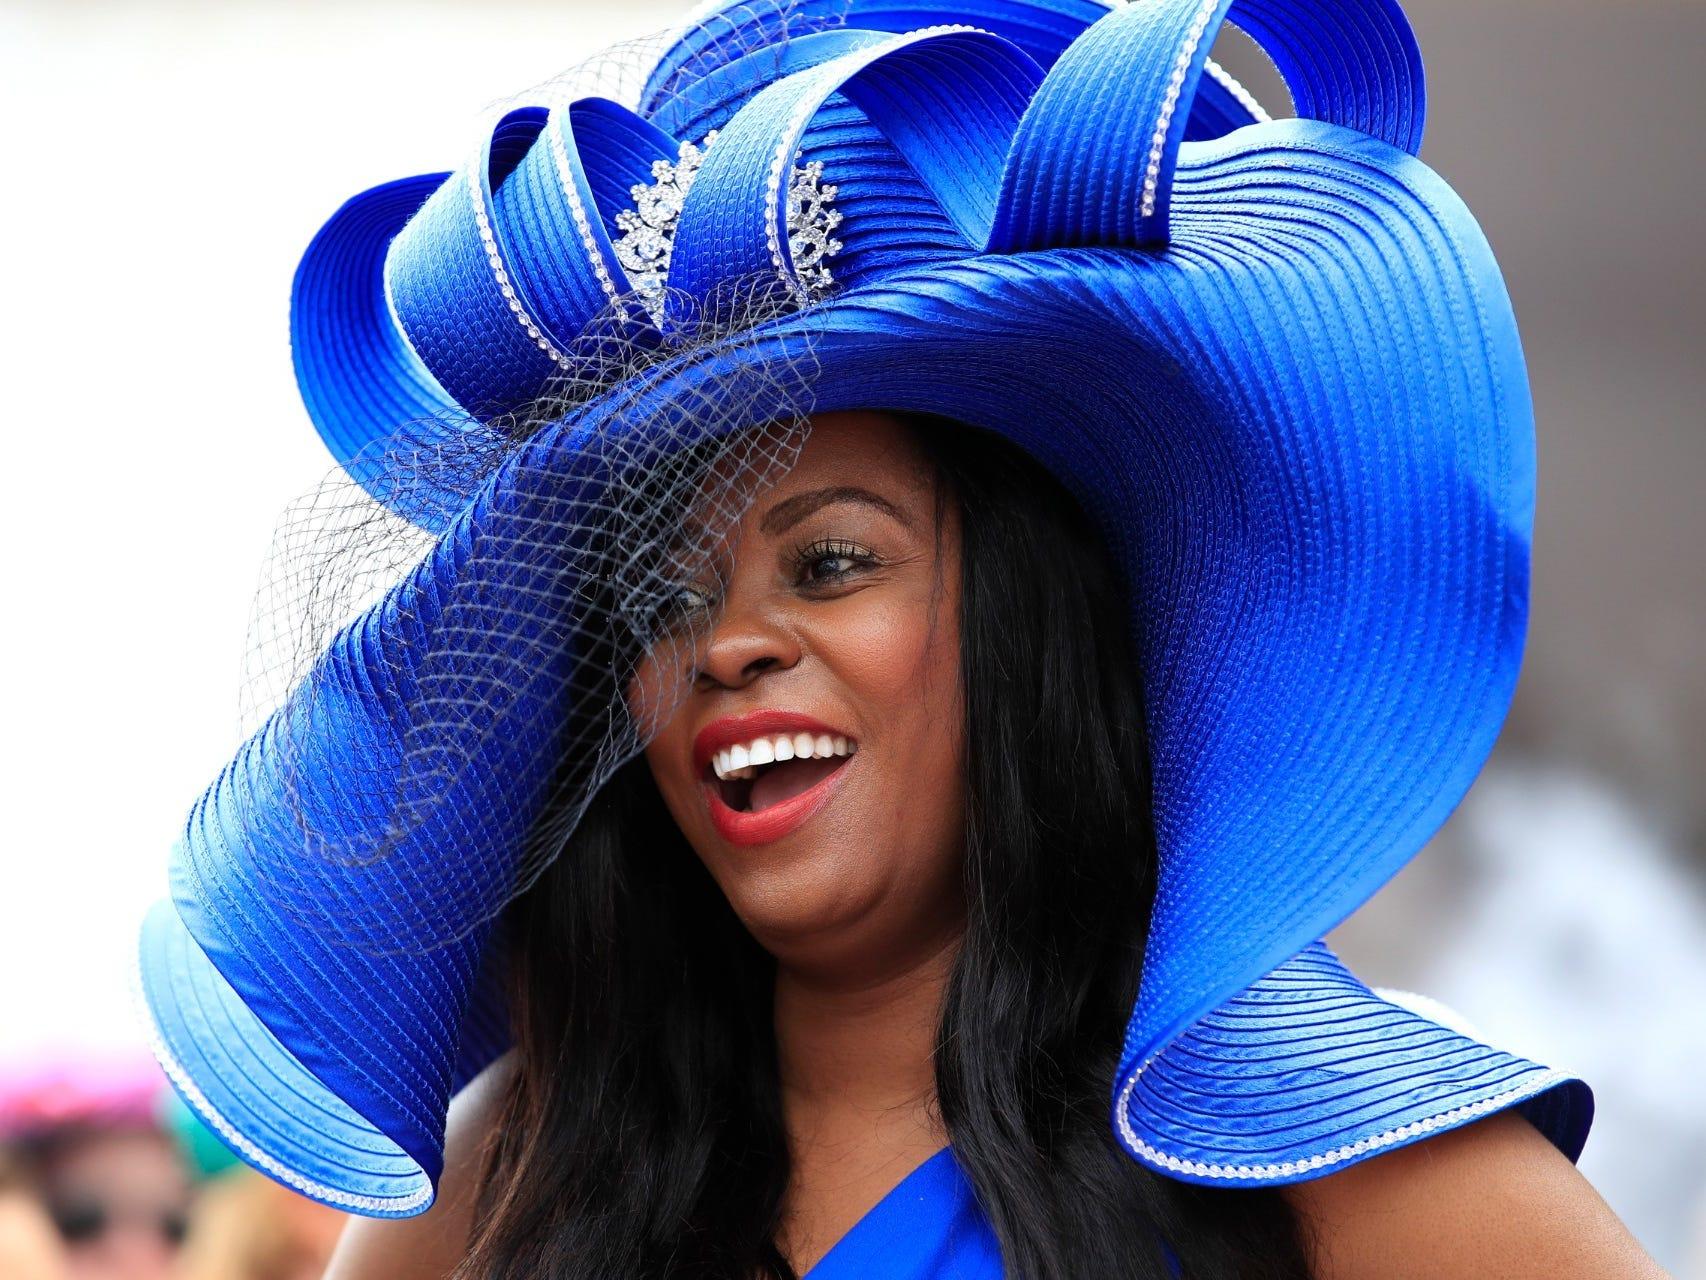 What's in a hat? Milliners tell us why wealthy Kentucky Derby attendees